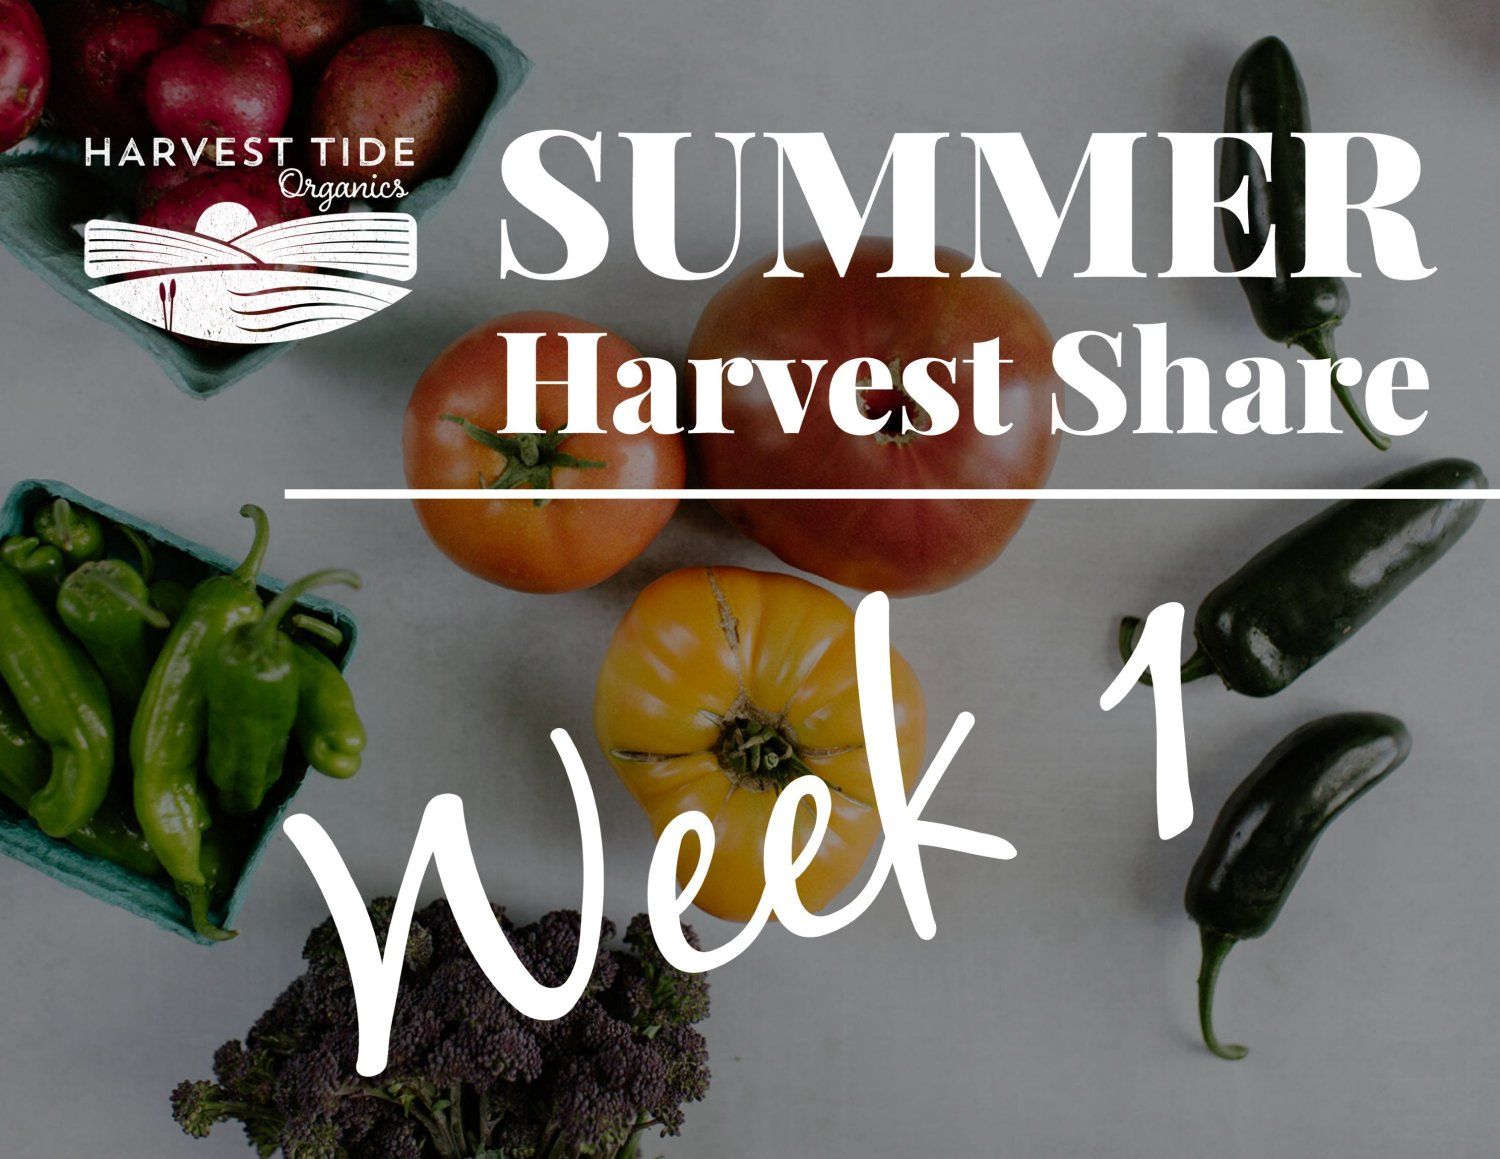 Next Happening: It's the first week of our 2022 Summer Share!